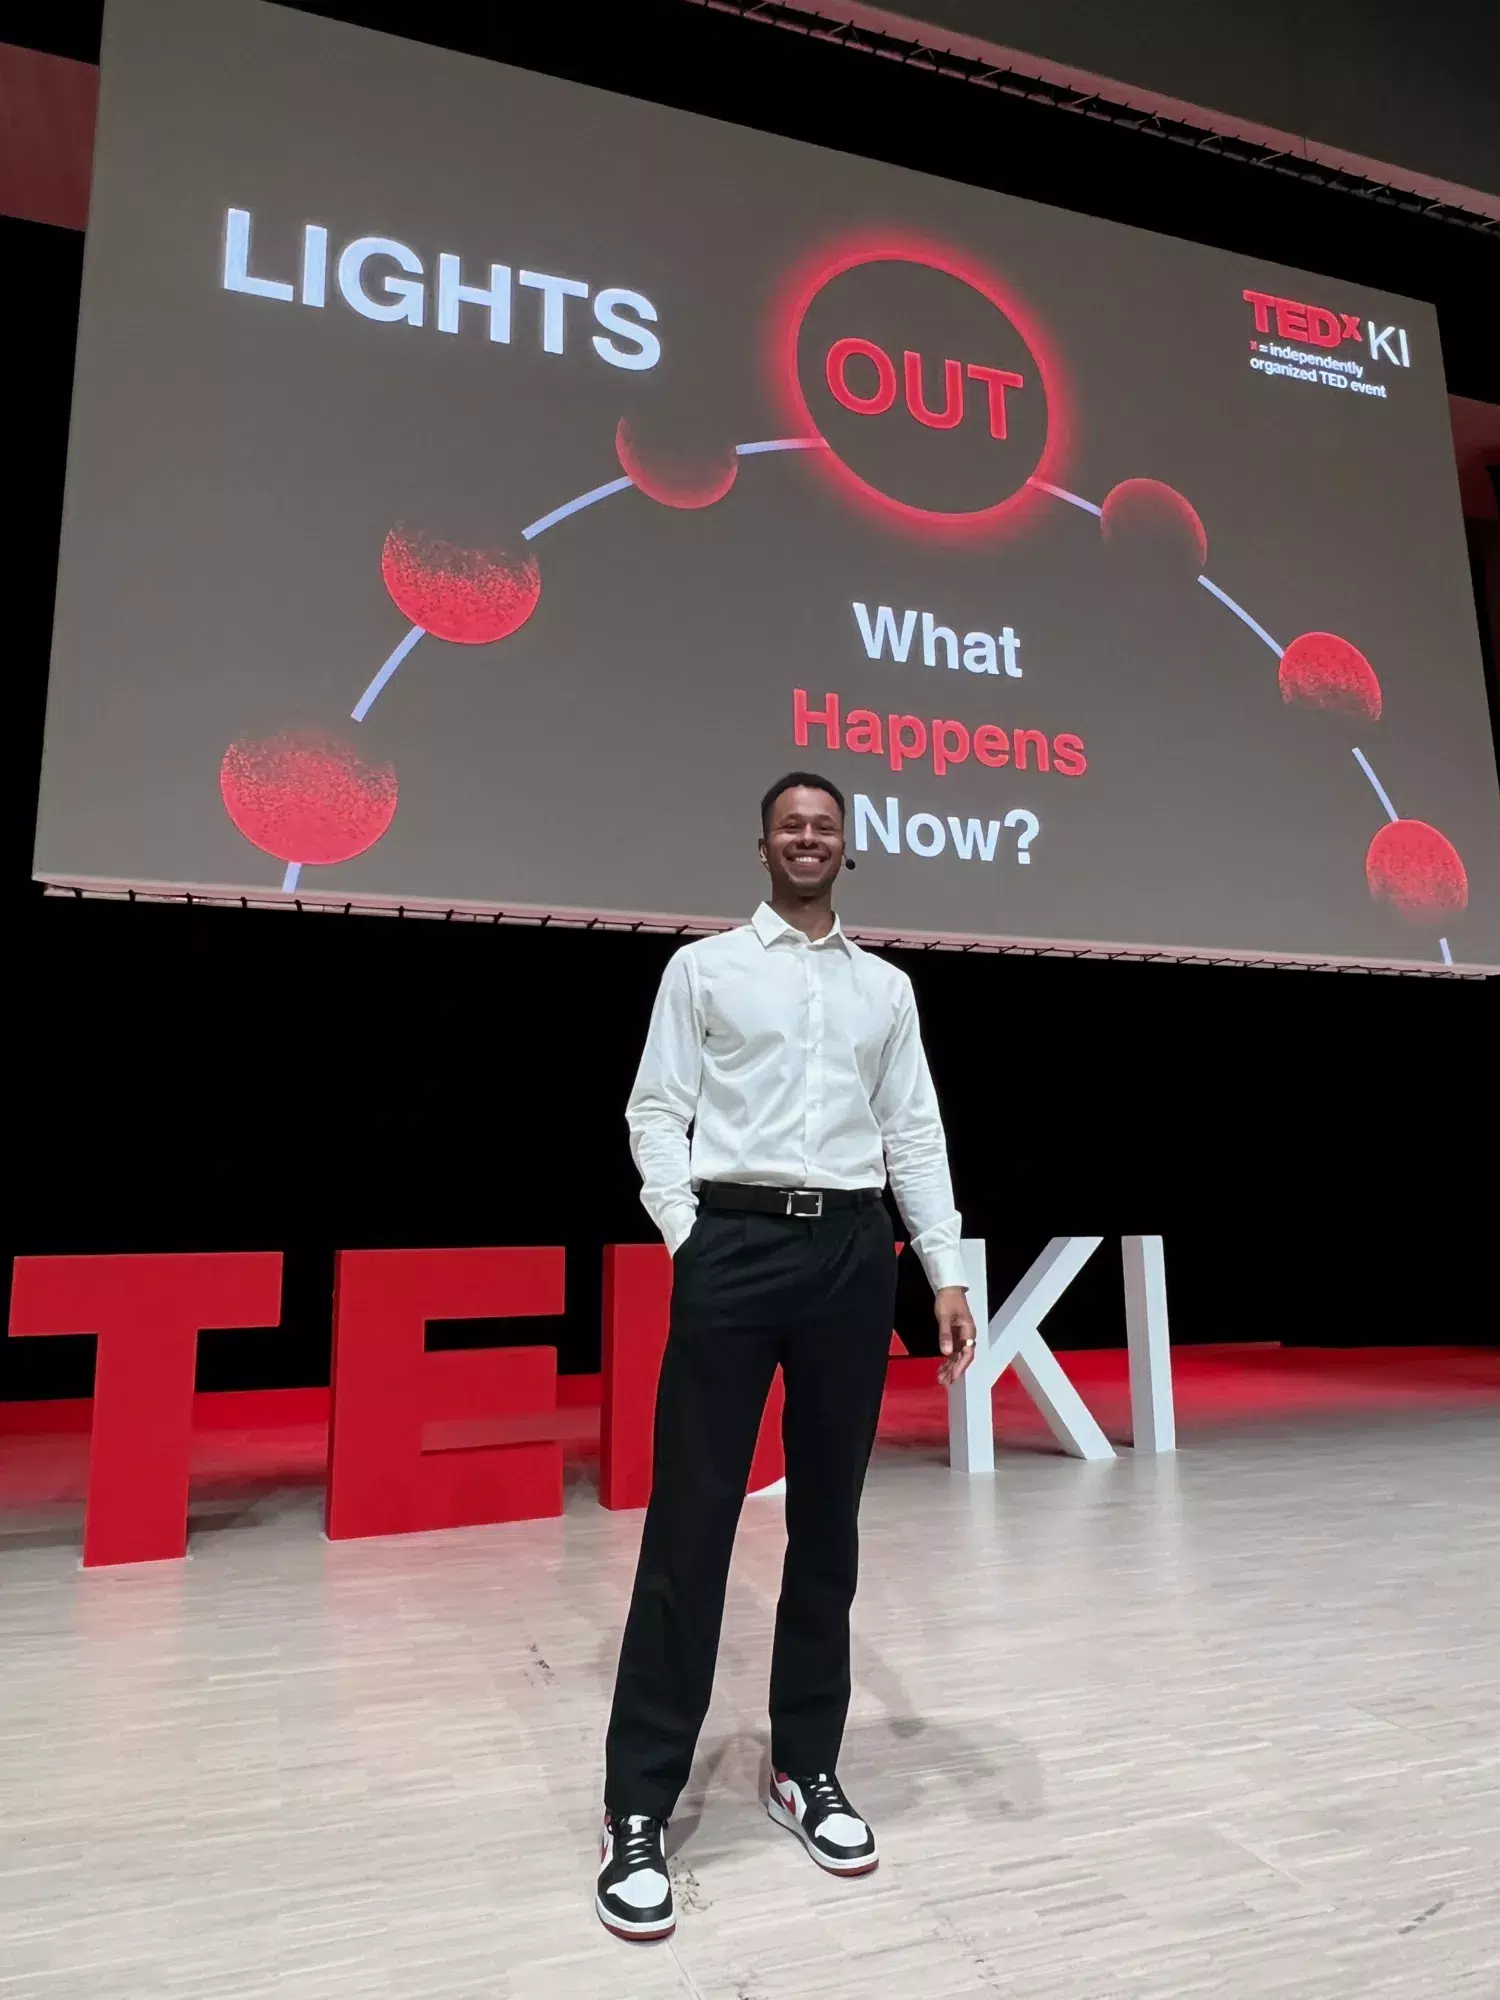 KI student Tade on stage during a TEDxKI event.